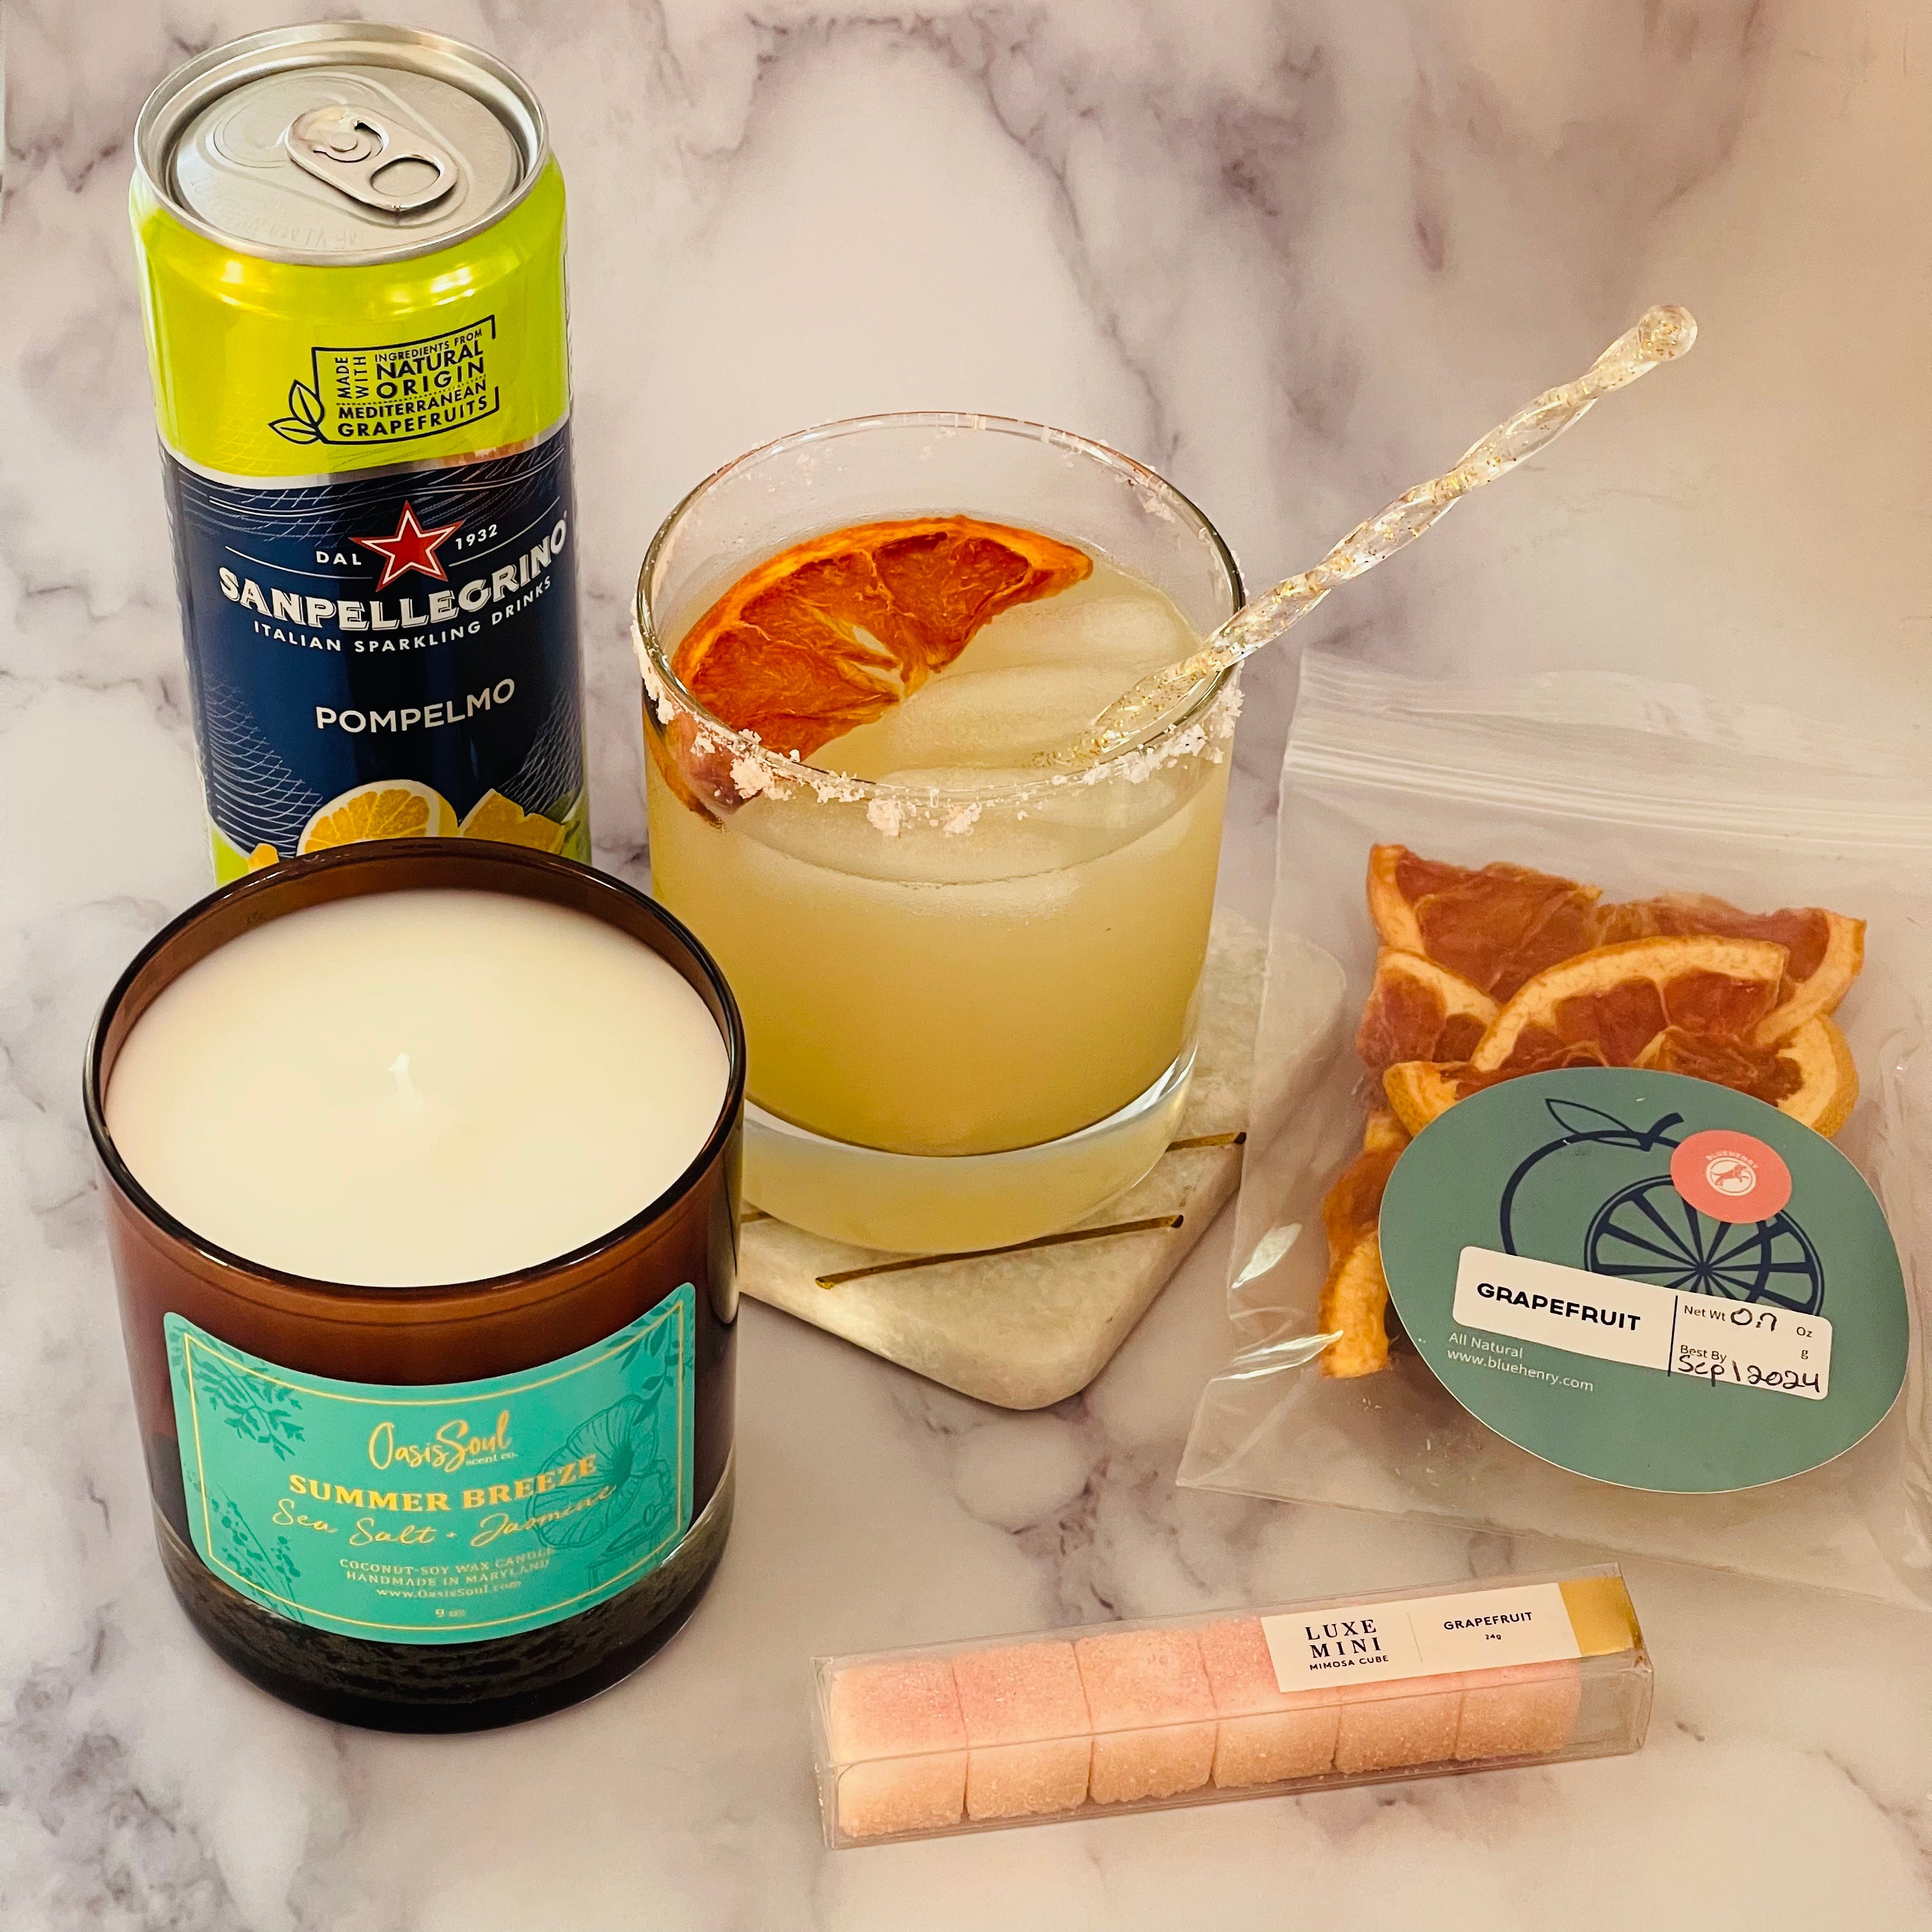 Candles & Cocktails Vacay Box - SUMMER BREEZE